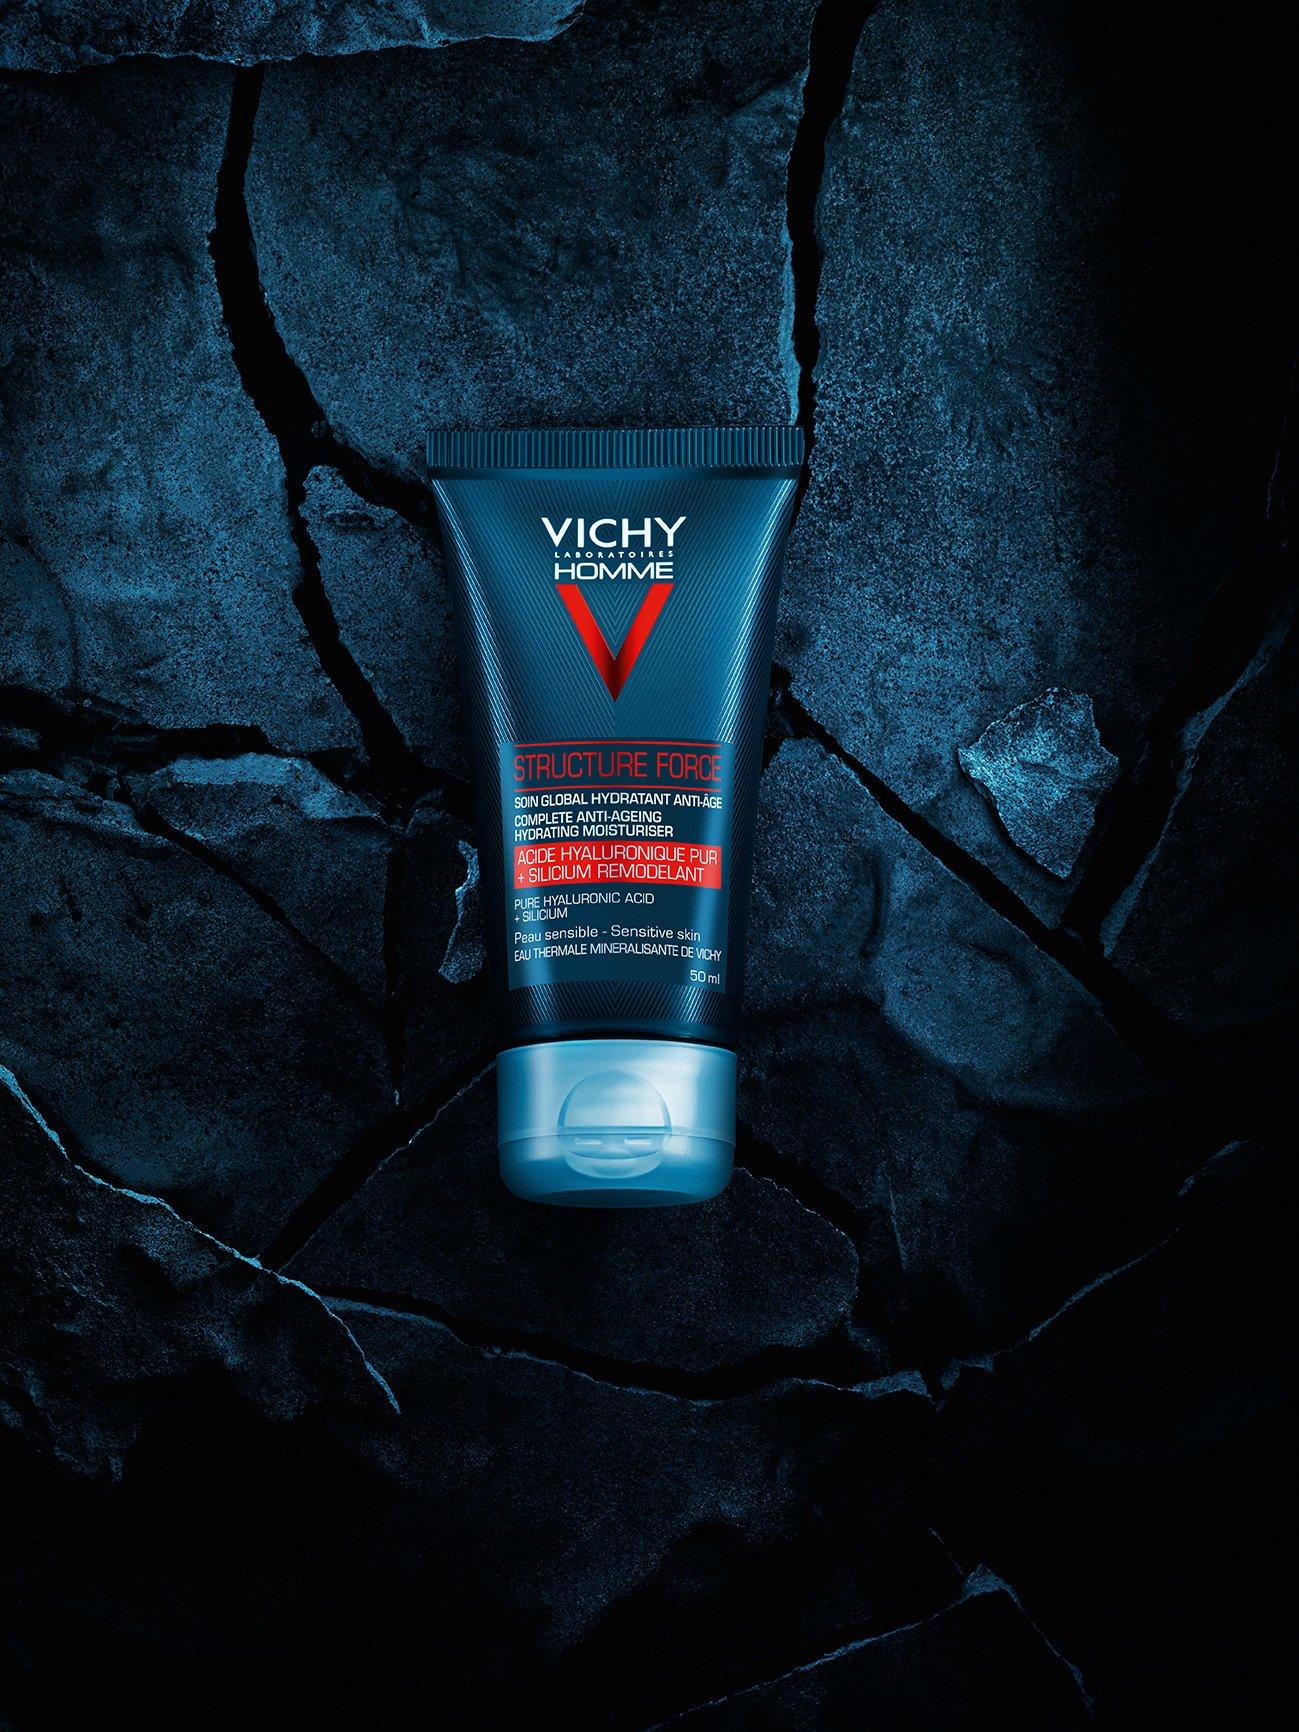 VICHY  Homme Structure Force - Soin complet anti-âge visage & yeux 